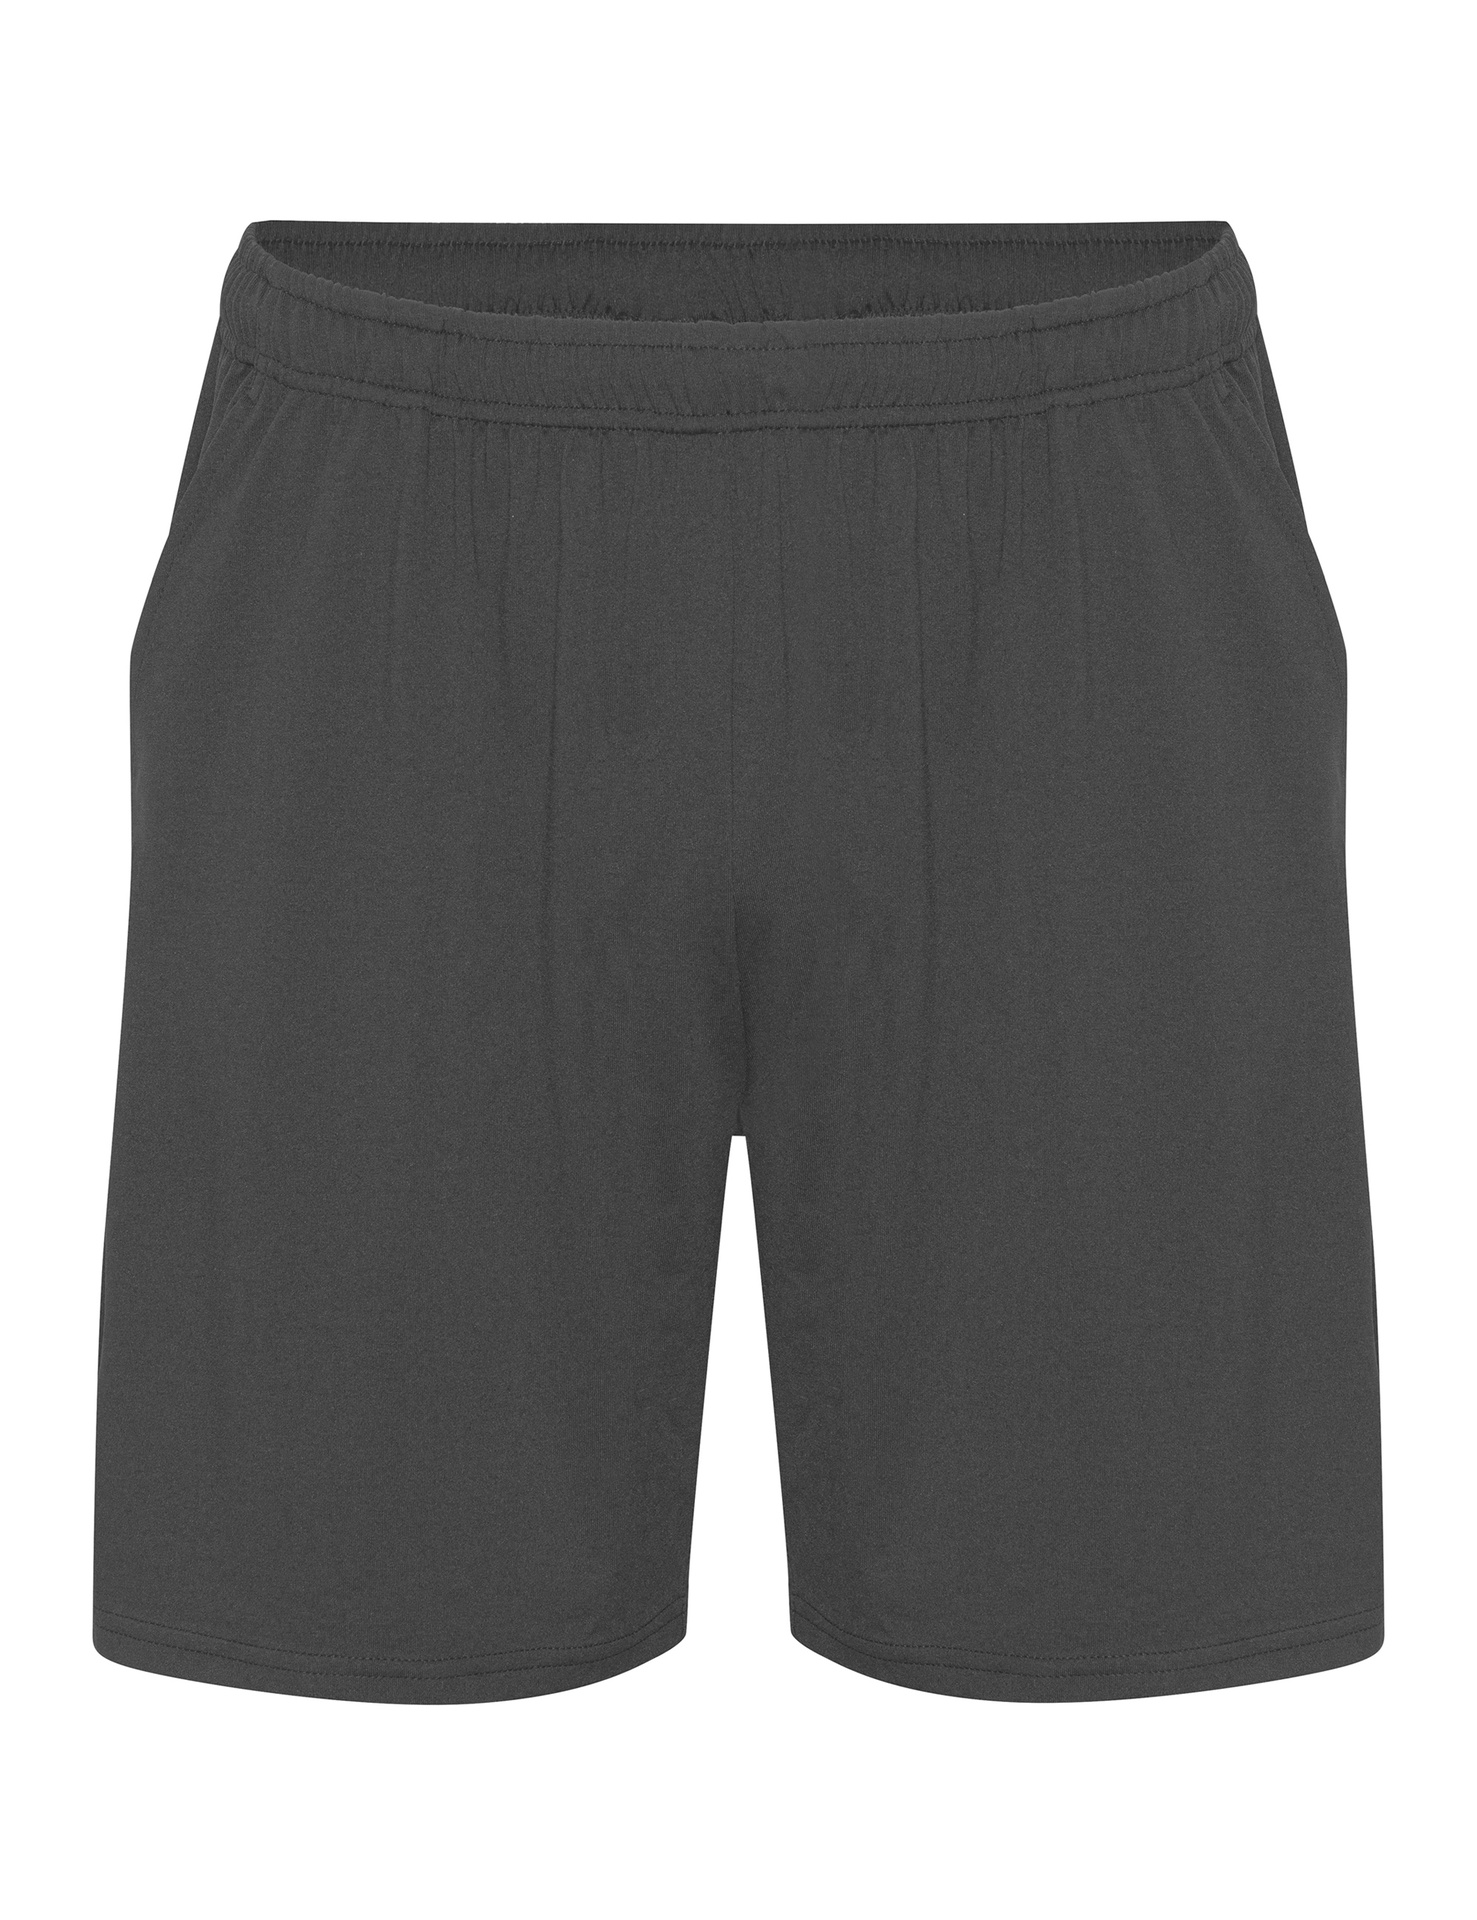 [PR/03870] Unisex Recycled Performance Shorts (Charcoal 06, XS)